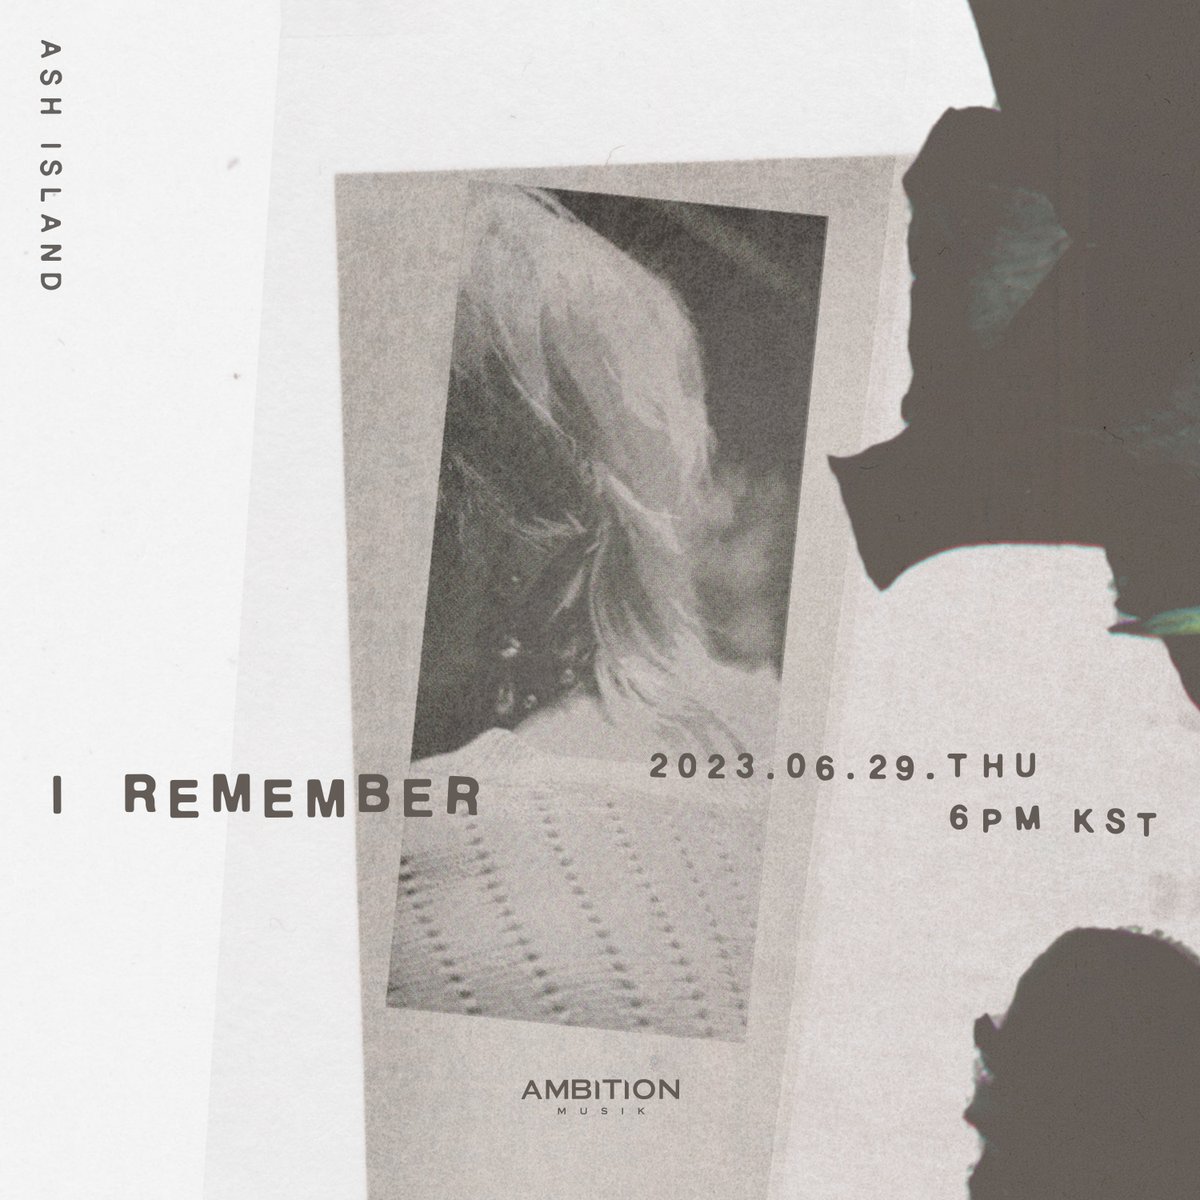 ASH ISLAND's DS 'I remember' will be released on June 29th.

ASH ISLAND 'I remember'
2023. 06. 29. THU. 6PM (KST)

#ASHISLAND #애쉬아일랜드 #Iremember
#AMBITIONMUSIK #앰비션뮤직